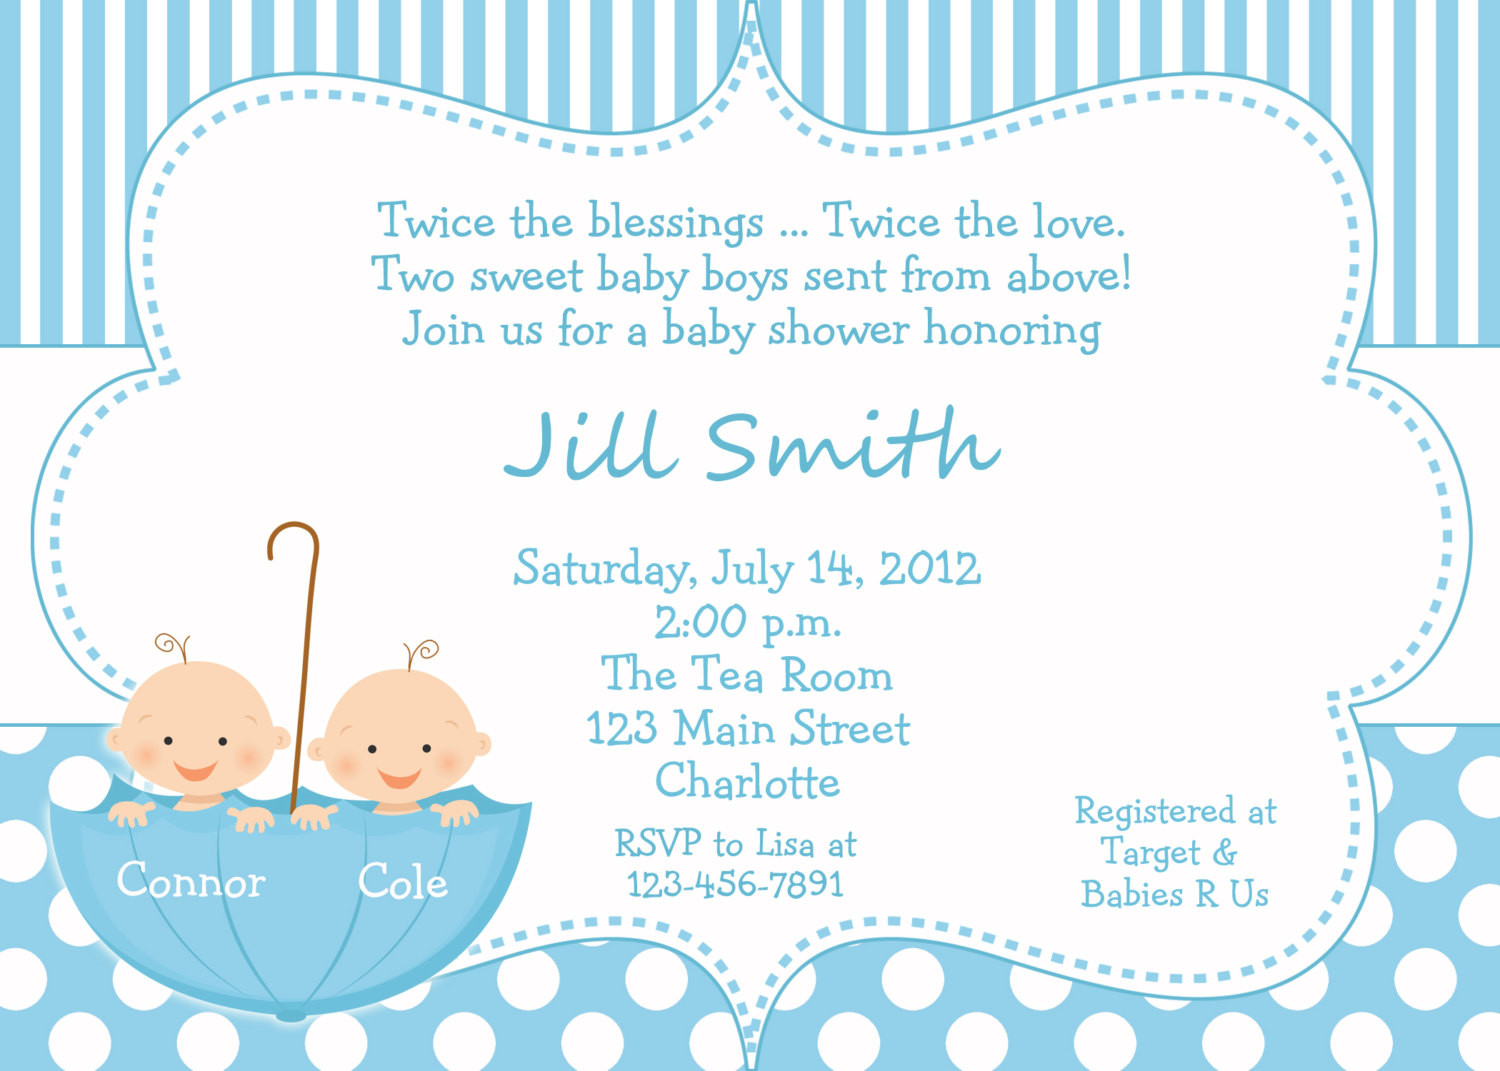 Full Size of Baby Shower:delightful Baby Shower Invitation Wording Picture Designs Baby Shower Invitations With Baby Shower De Niño Plus Cheap Baby Shower Gifts Together With Baby Boy Shower Favors